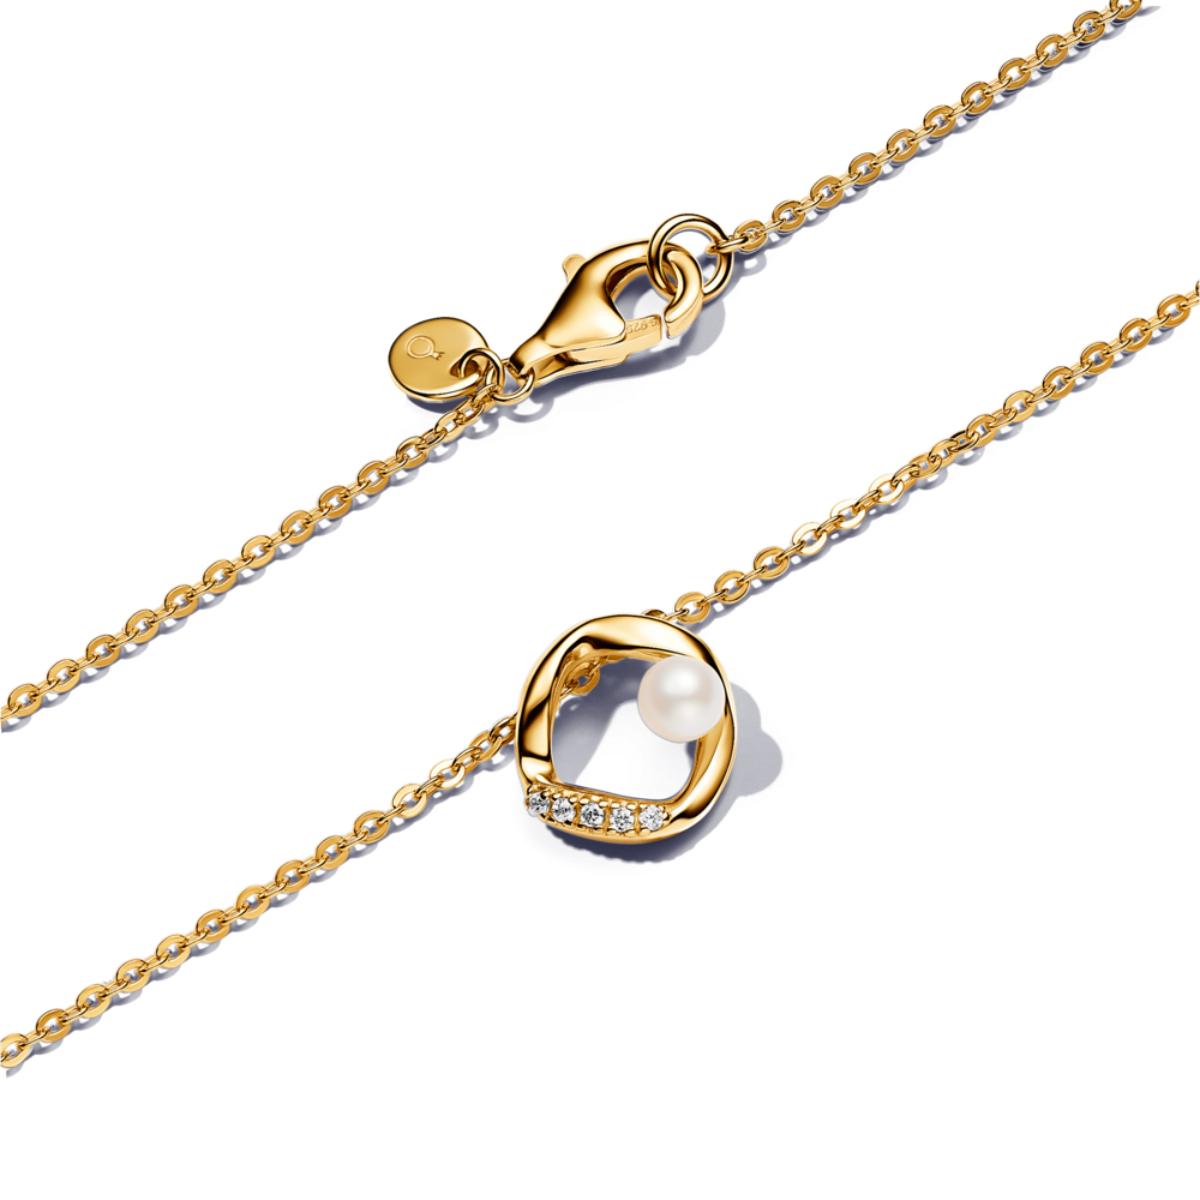 Organically Shaped Pavé Circle & Treated Freshwater Cultured Pearl Collier Necklace